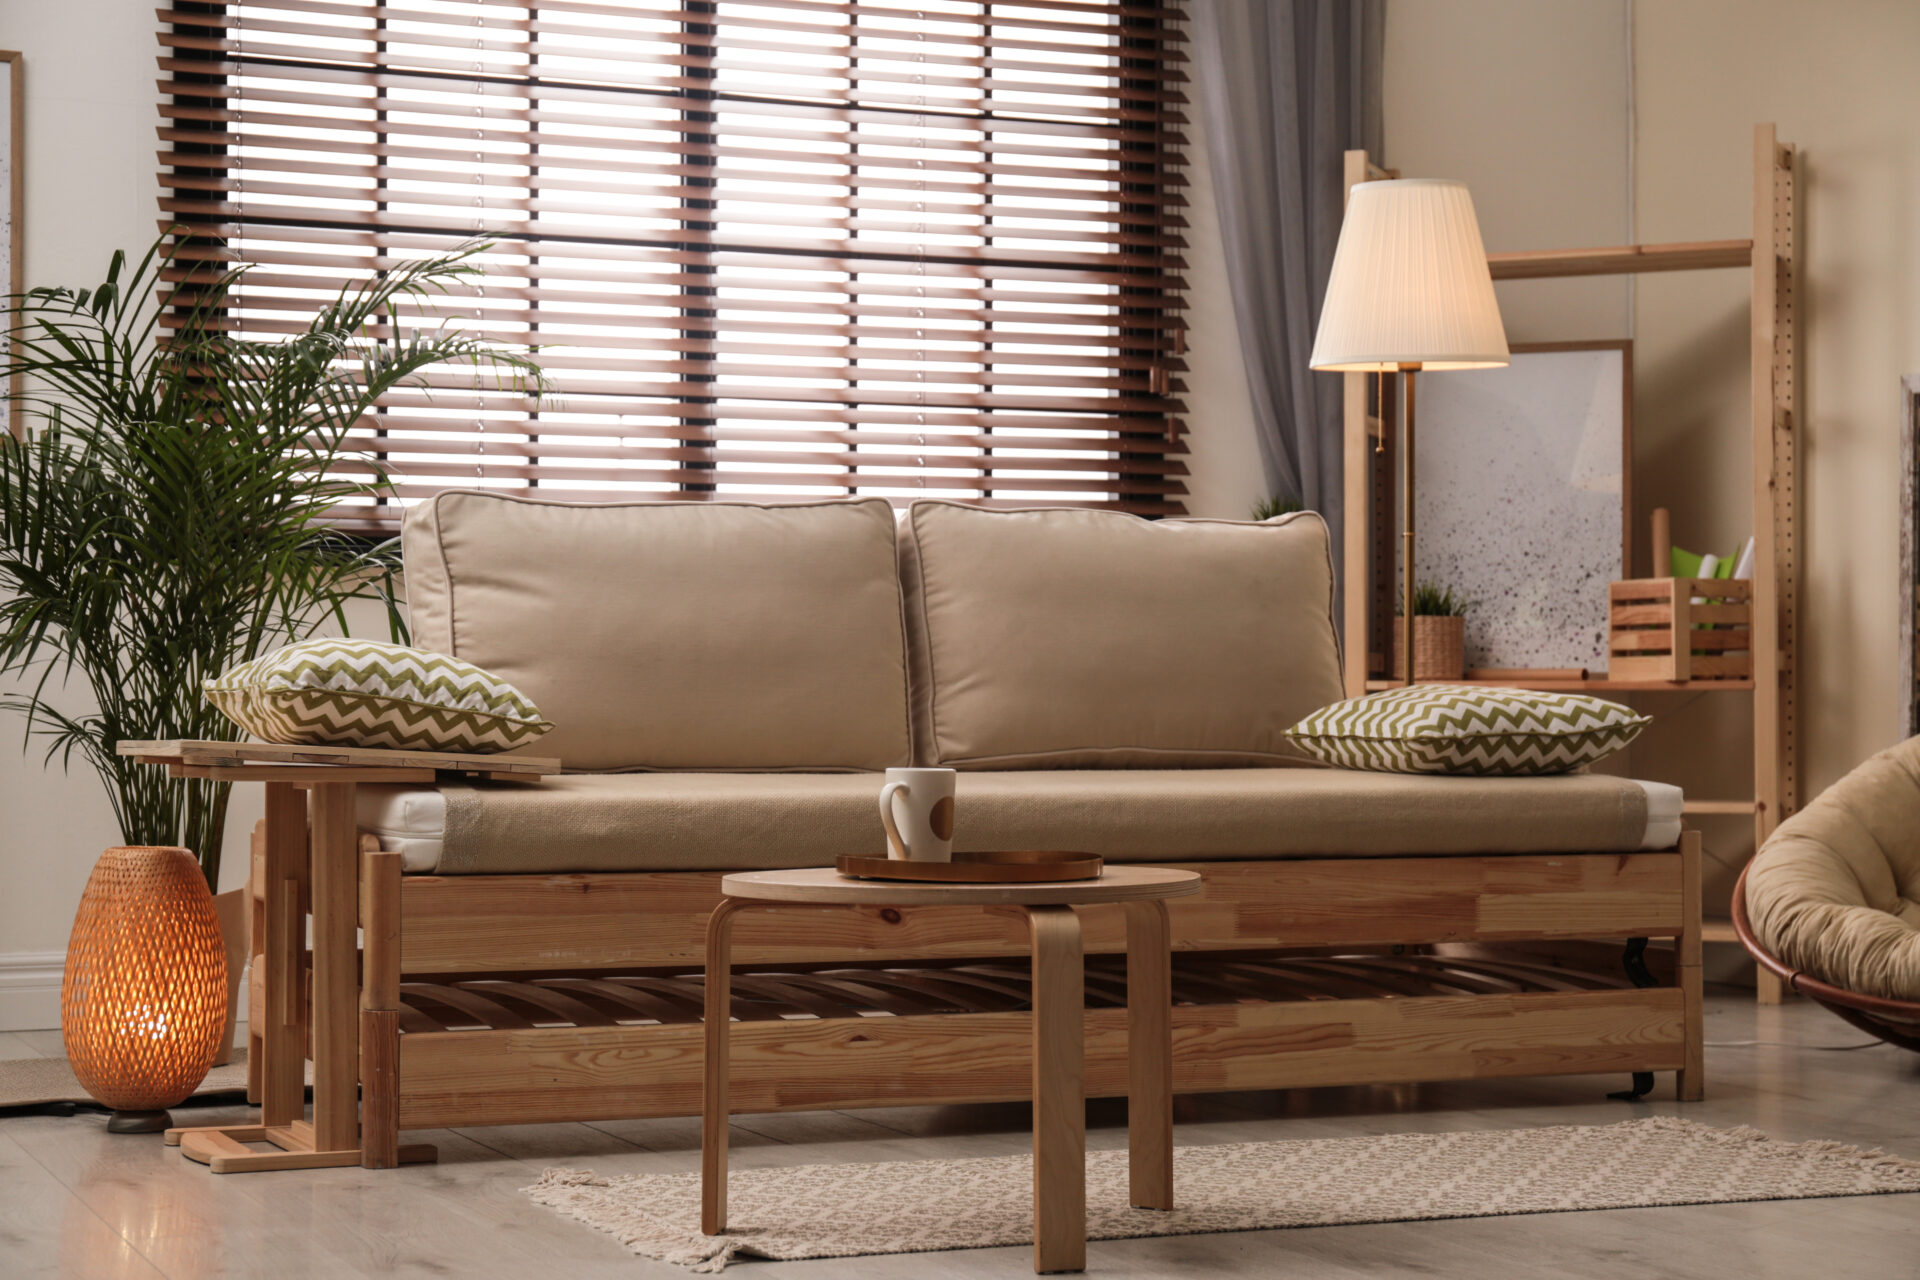 Living room interior with sofa, window blinds and stylish décor and faux wooden blinds